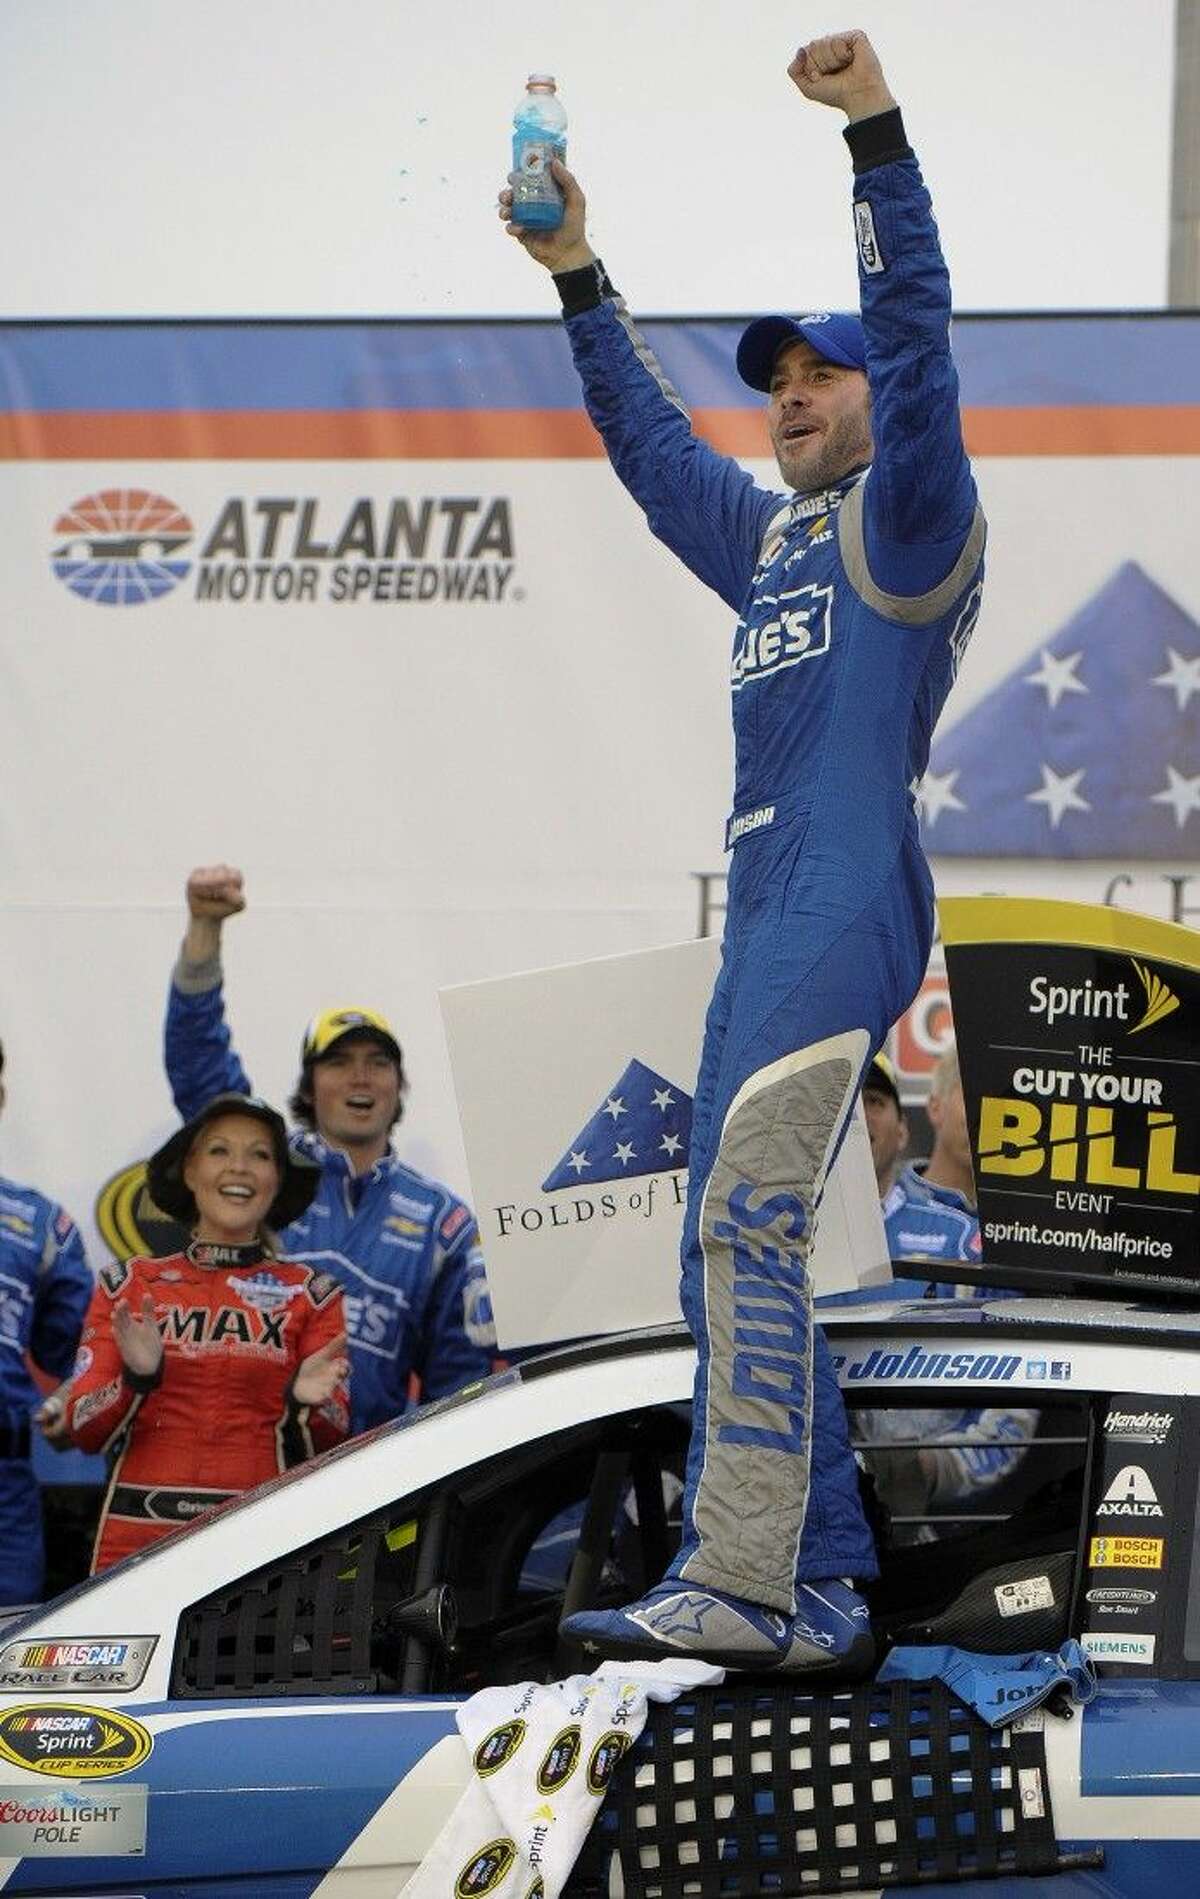 Jimmie Johnson reacts after winning the NASCAR Sprint Cup auto race at Atlanta Motor Speedway.